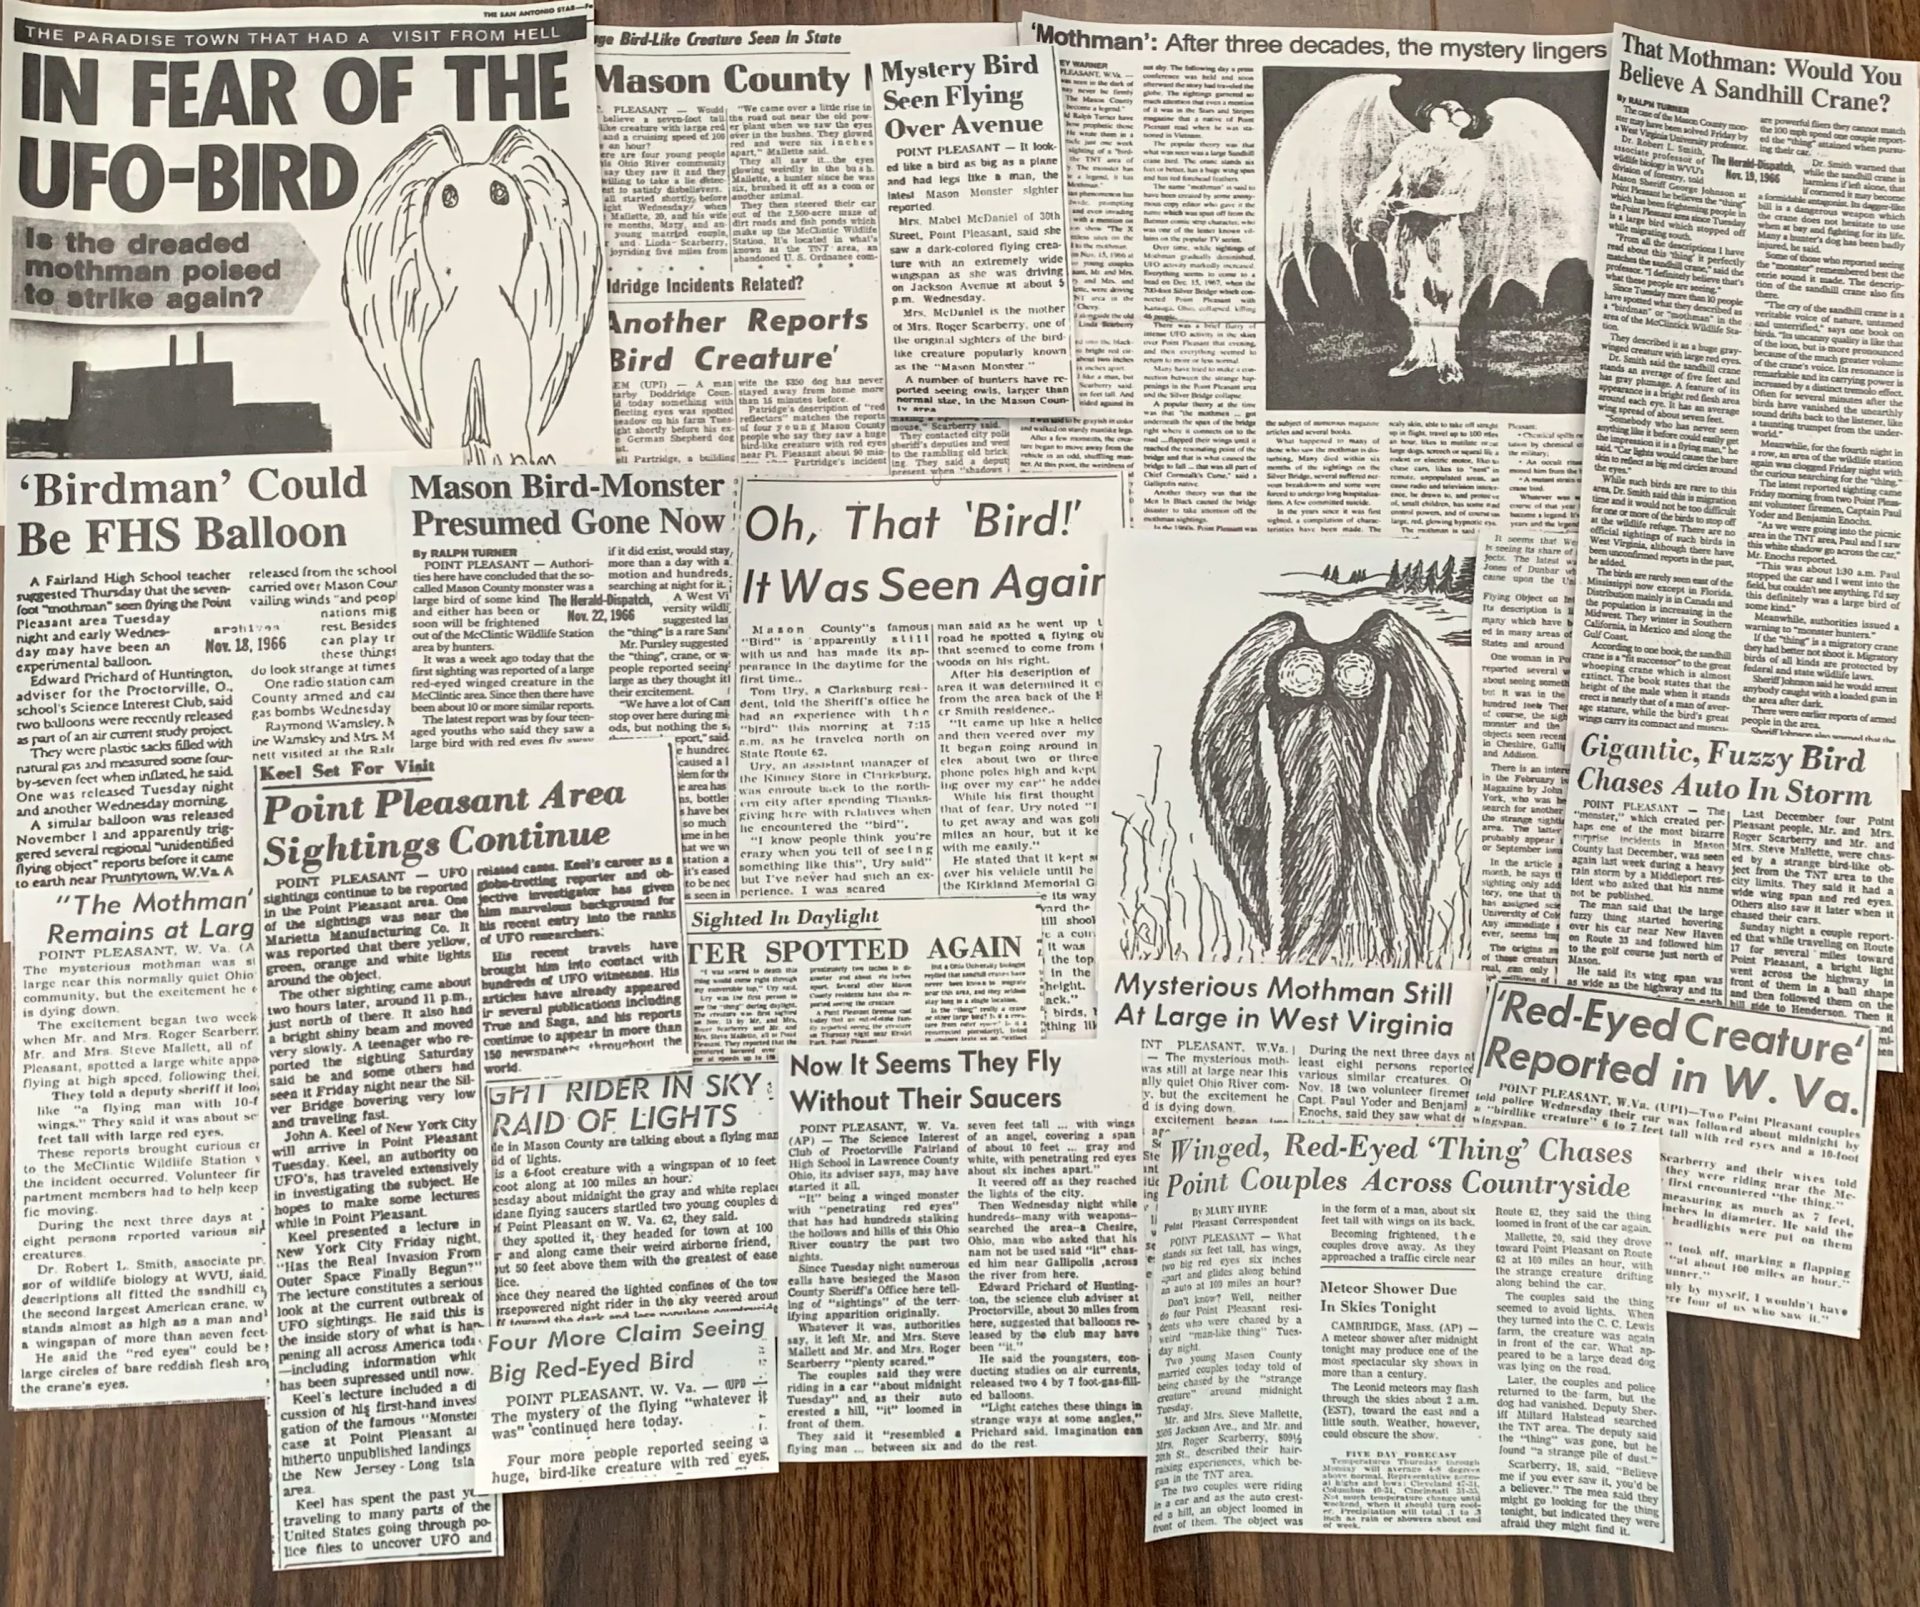 A collage of newspaper clippings about the Mothman sightings in West Virginia in the 1960s. The clippings are black and white and have different headlines, illustrations, and stories about the mysterious creature that was reported to have red eyes, wings, and a humanoid shape. The clippings are arranged in a random and overlapping manner.